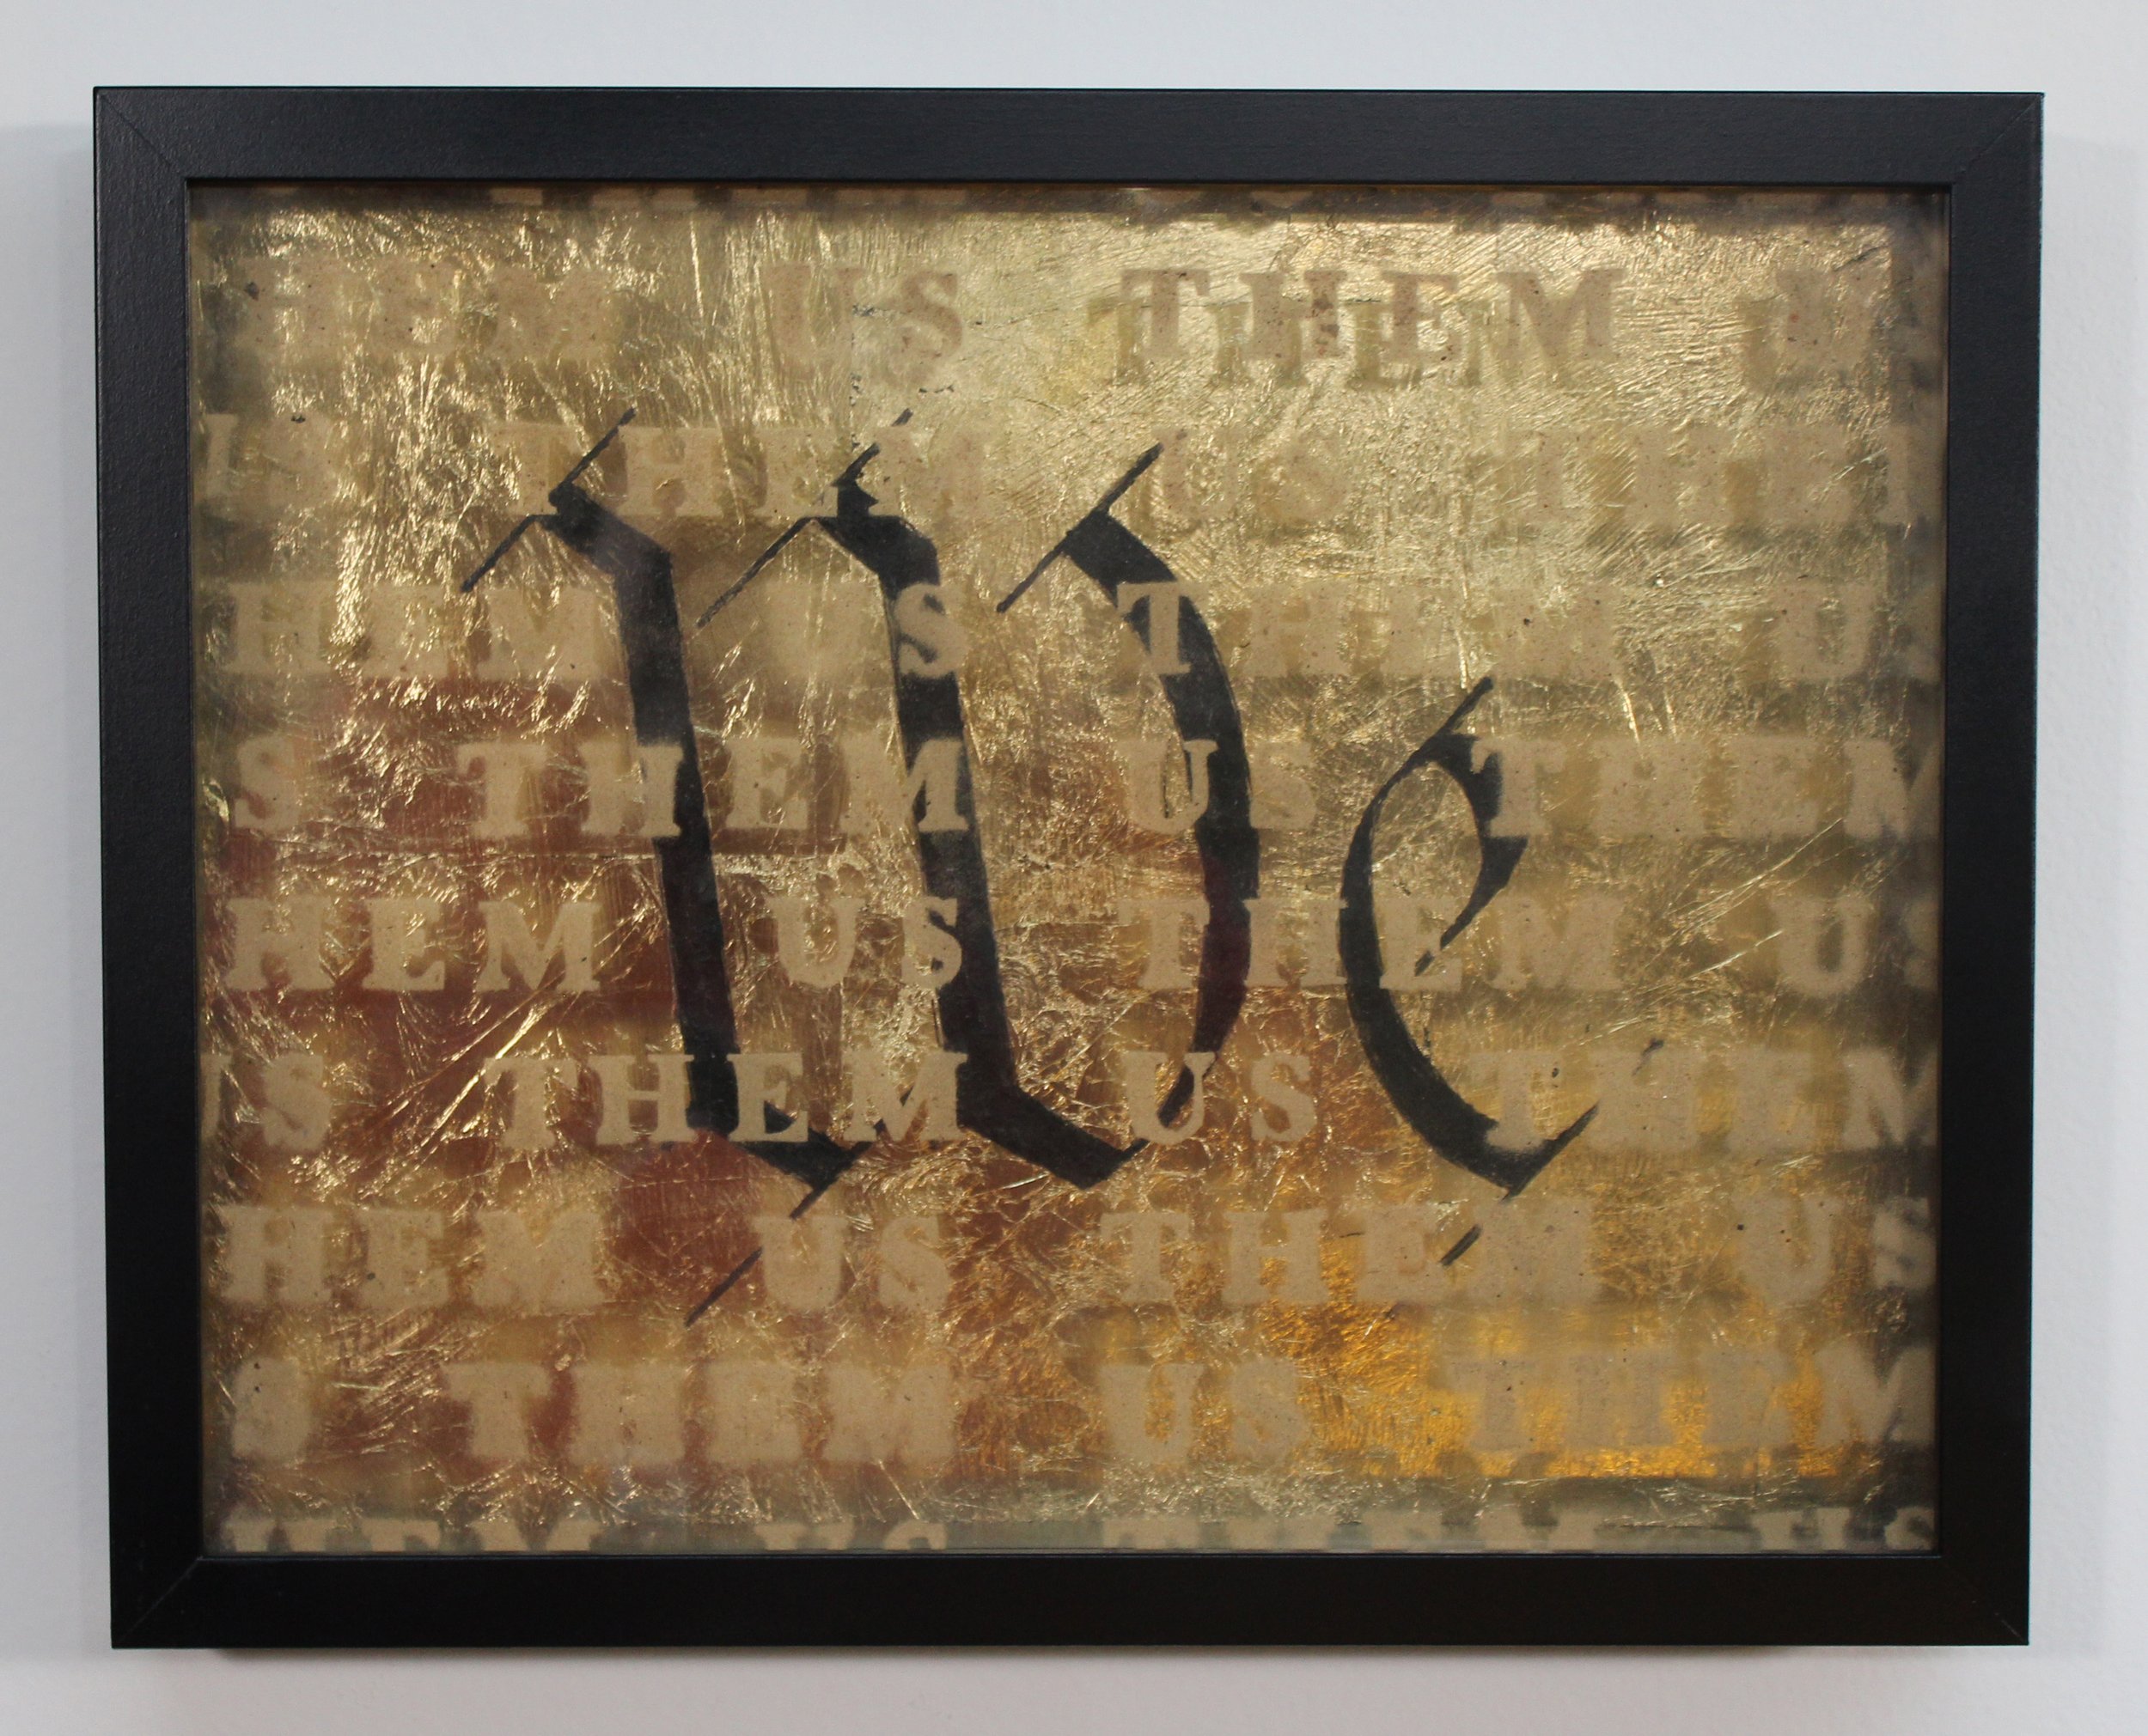  “As the Words Fell to Dust, They Did So in Twos,” acrylic, gold leaf, and collected barn dust on glass 